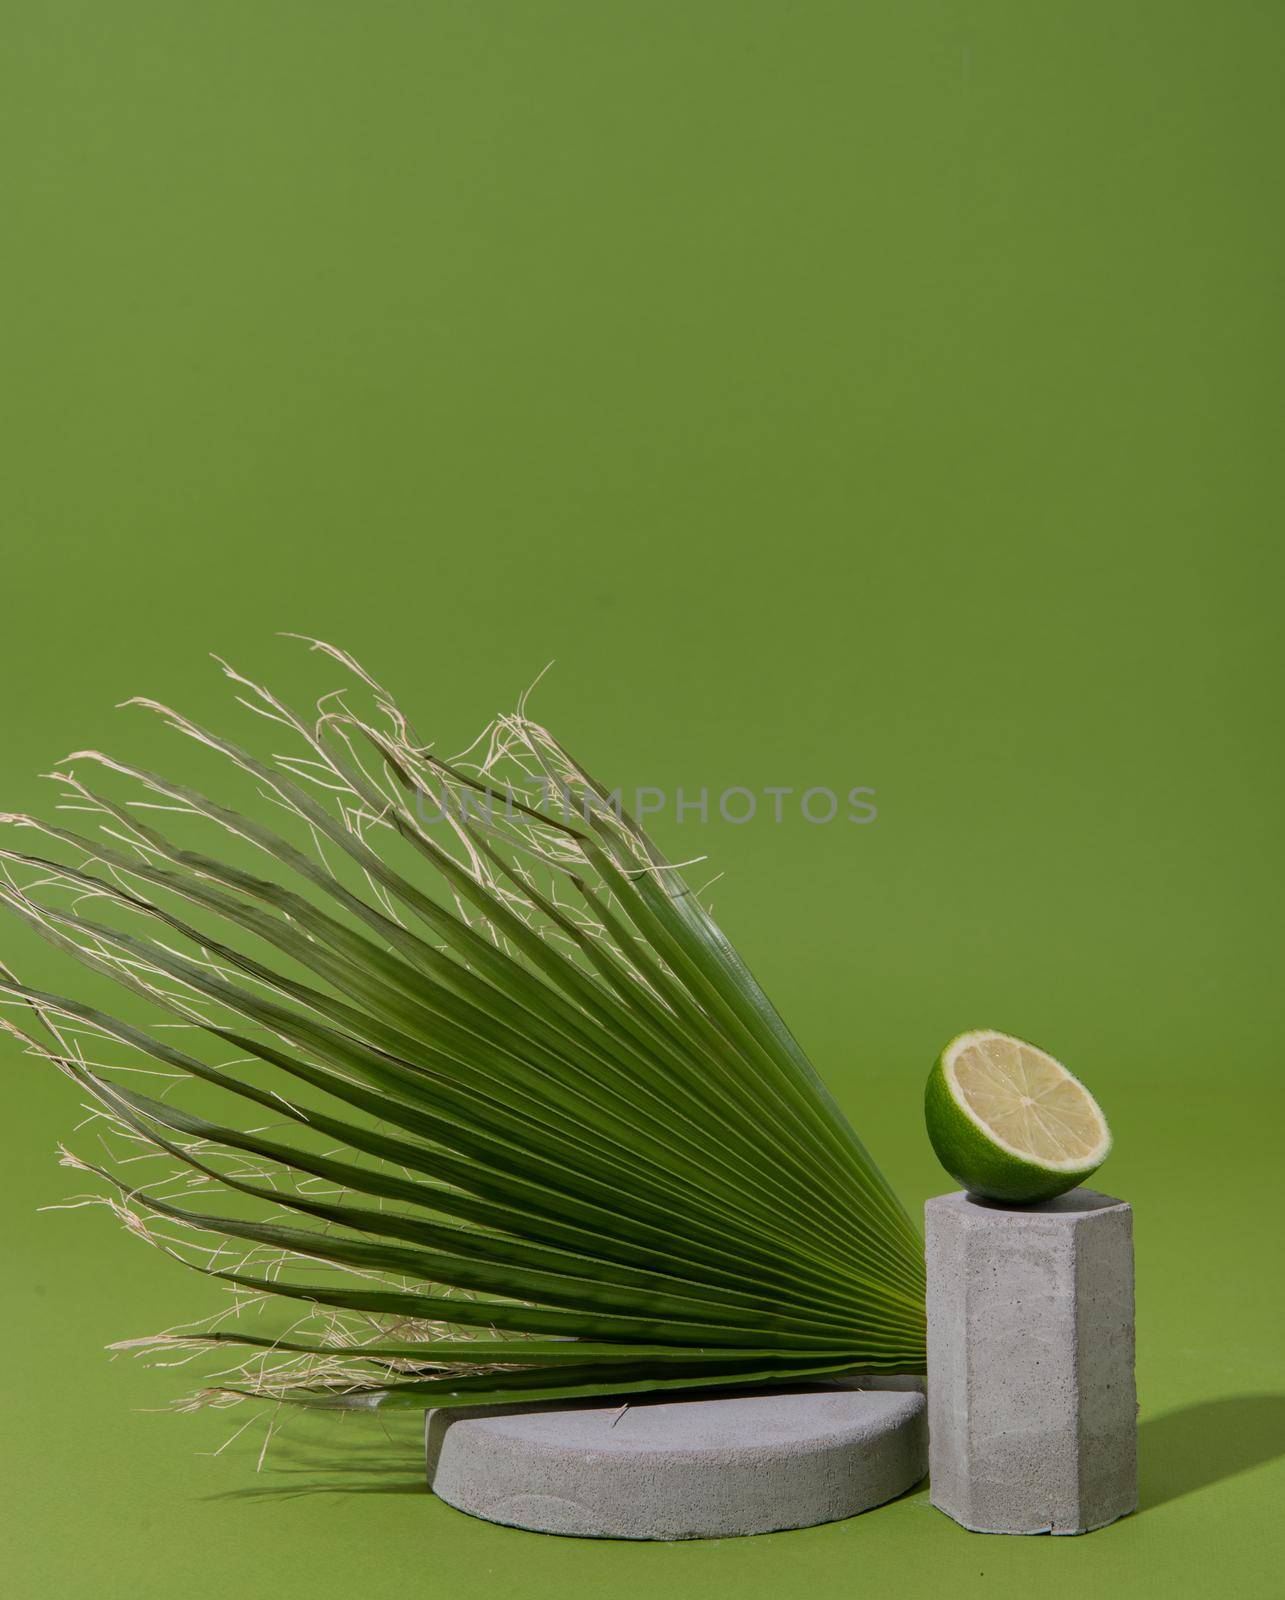 mockup with palm leaf, lime half and concrete shapes by maramorosz